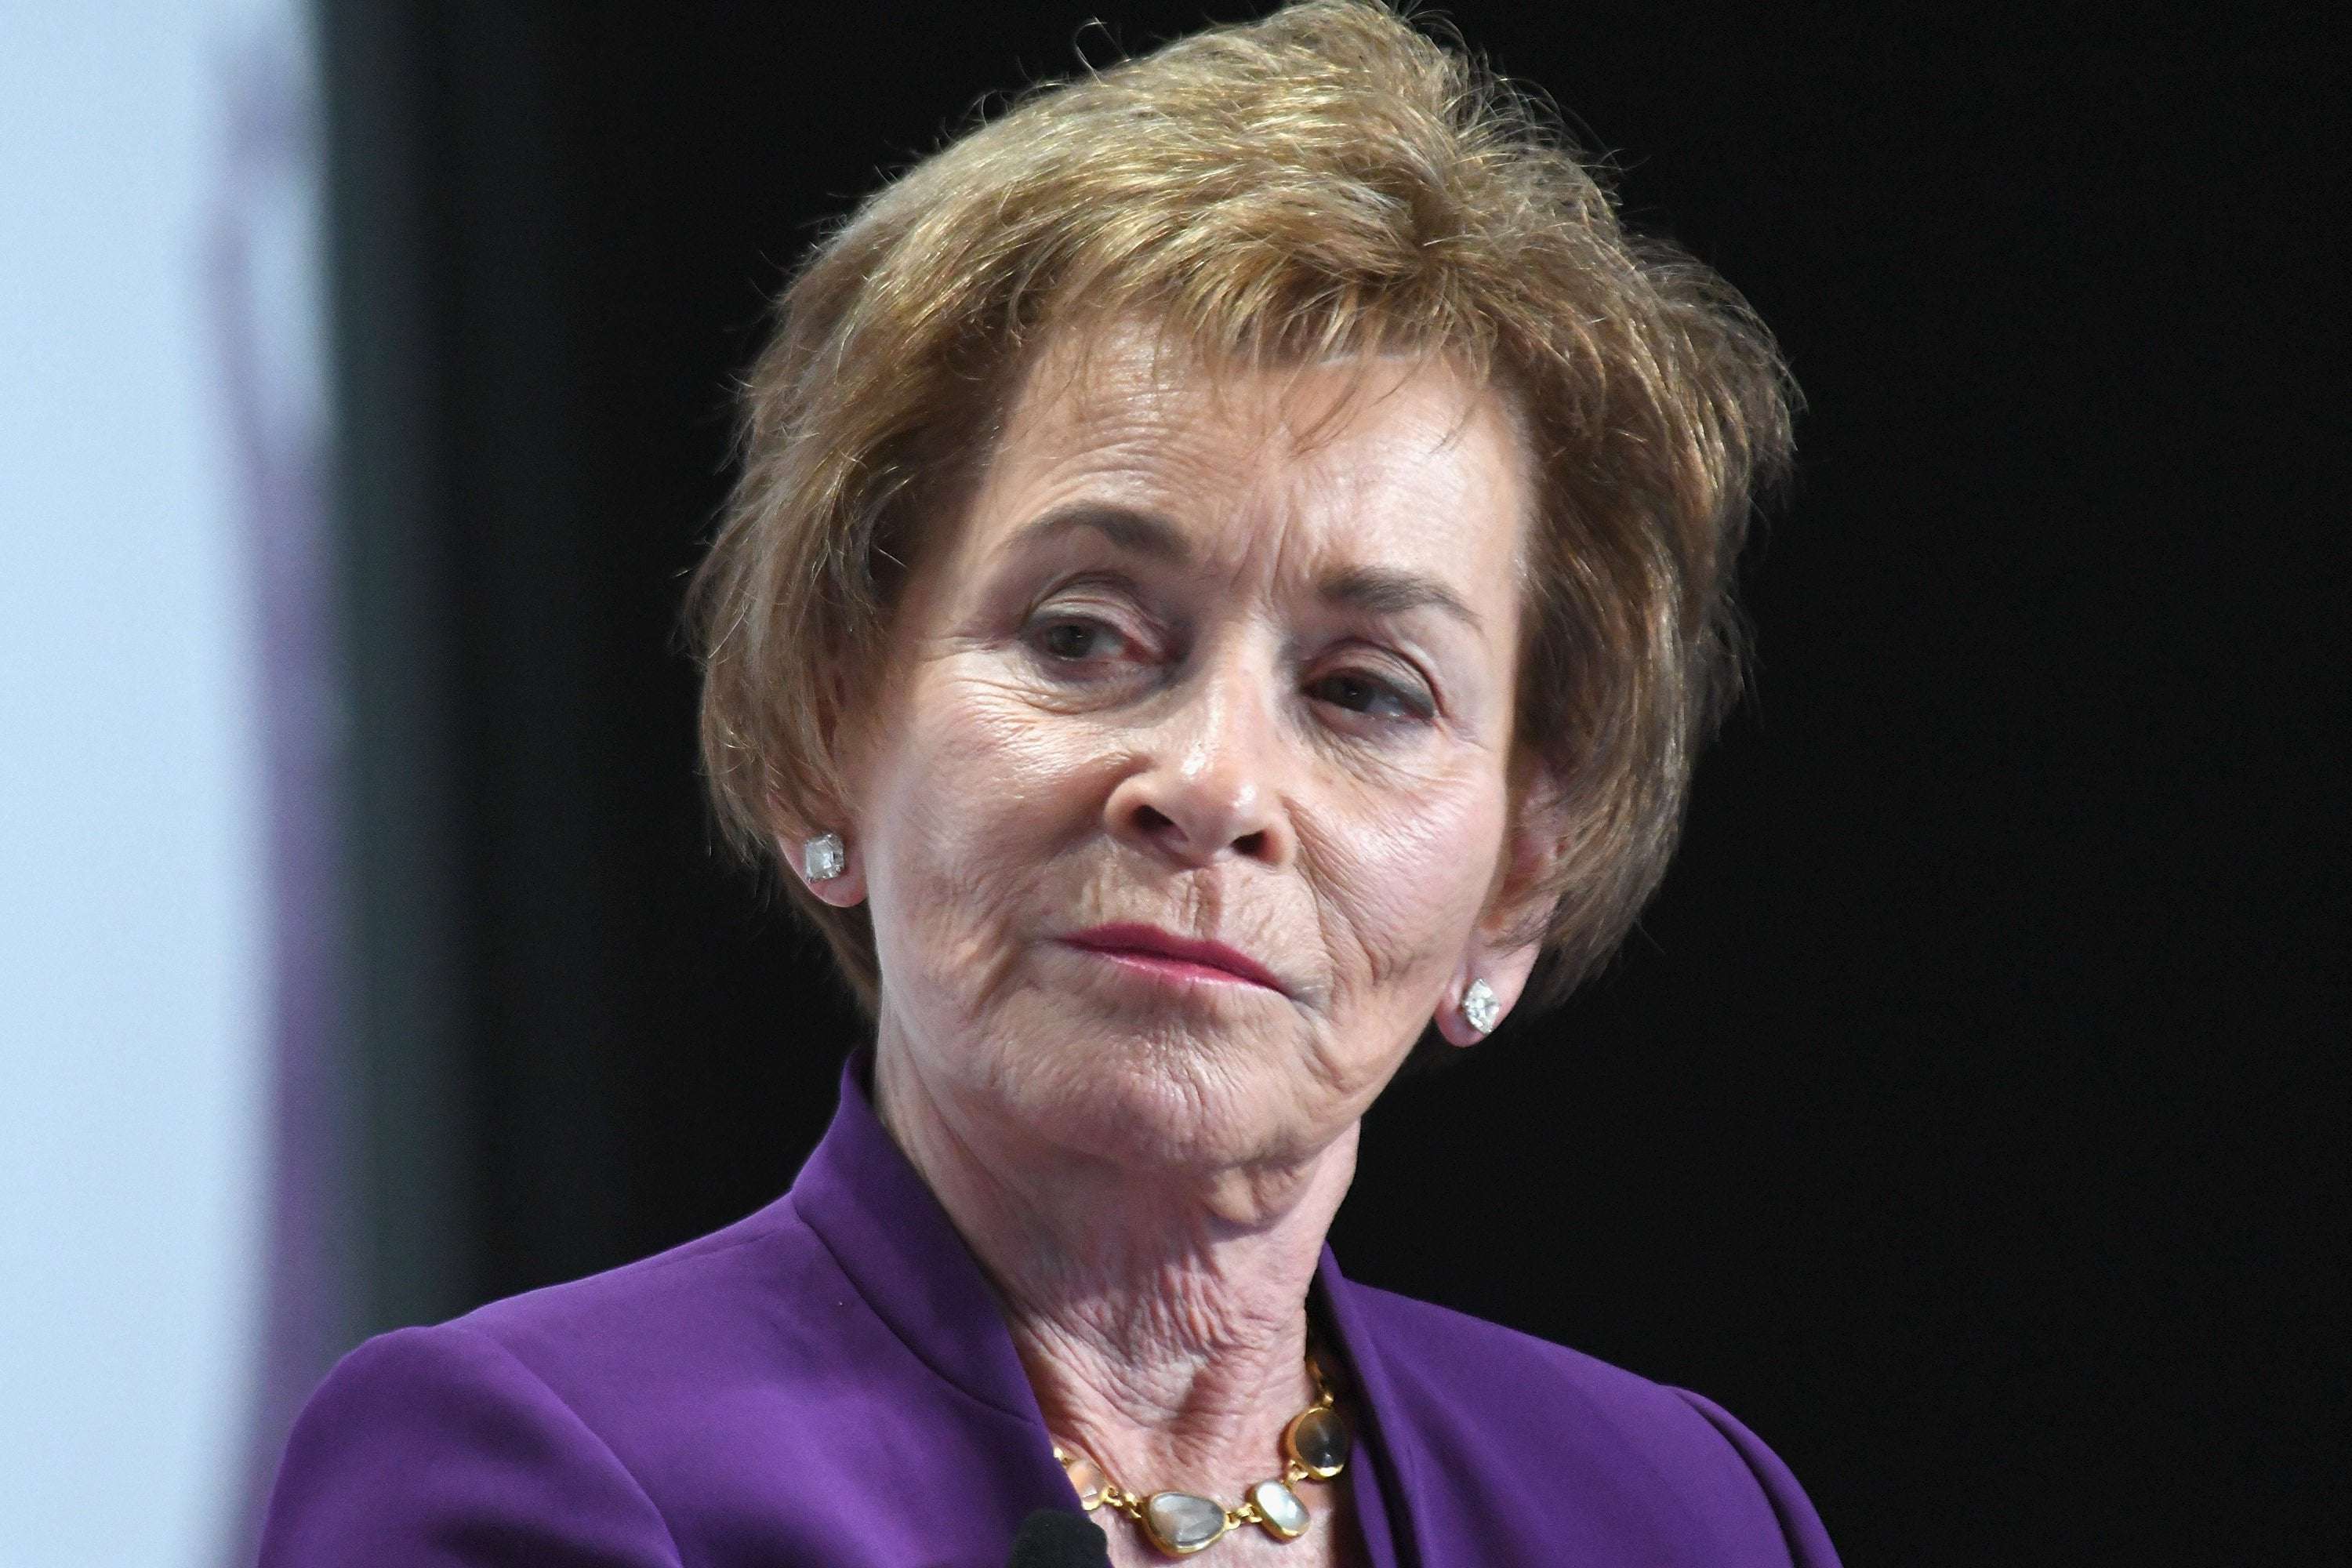 image for Donald Trump Should Take Election Challenge to Judge Judy, Twitter Users Suggest